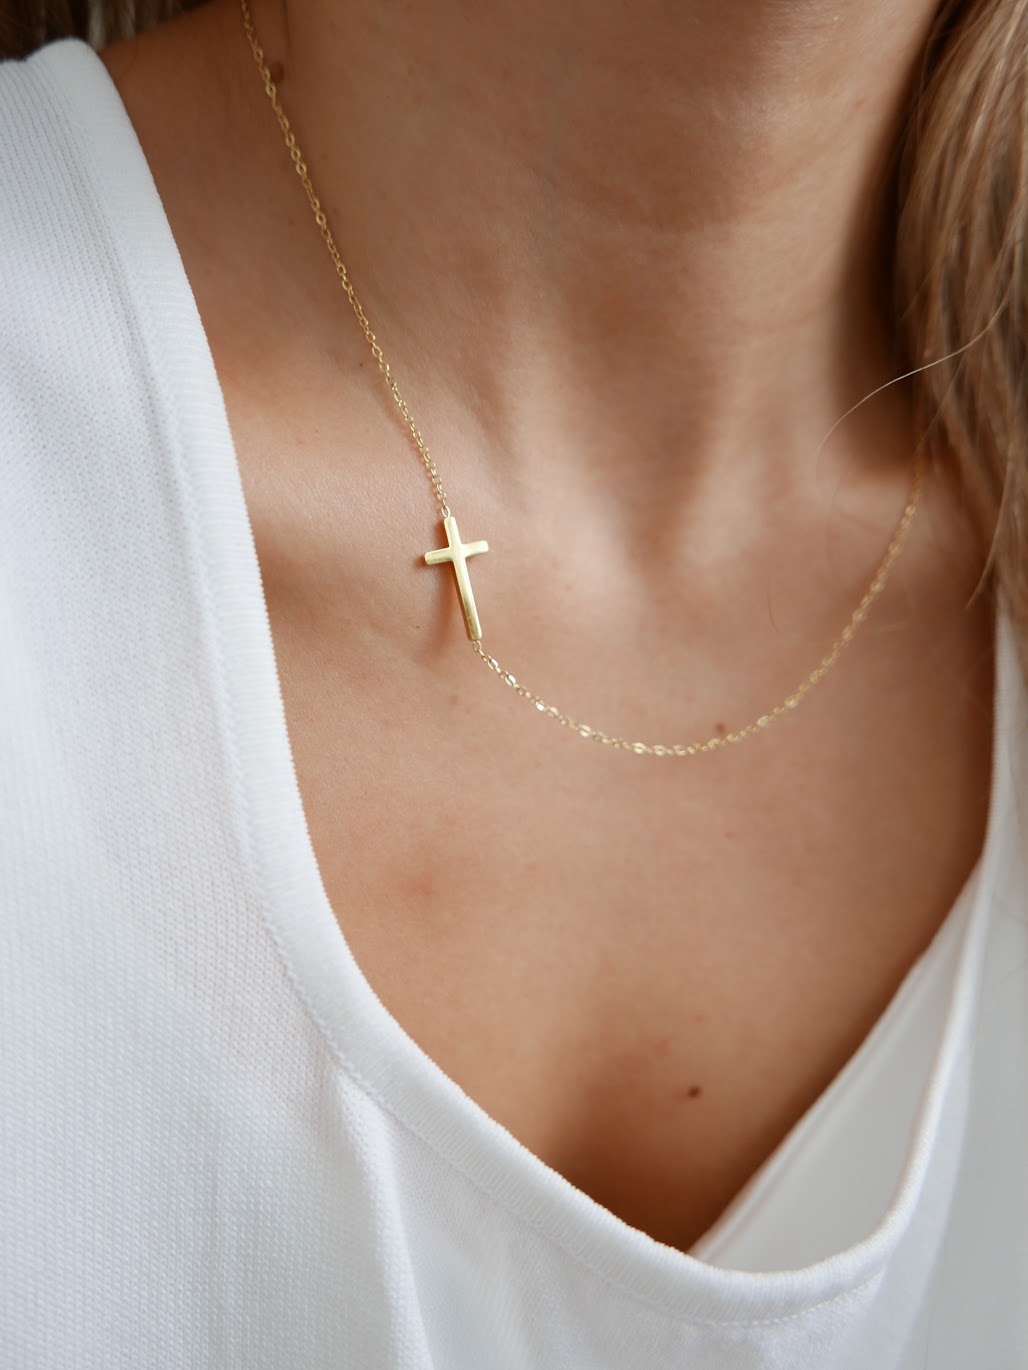 Daily Cross Necklace